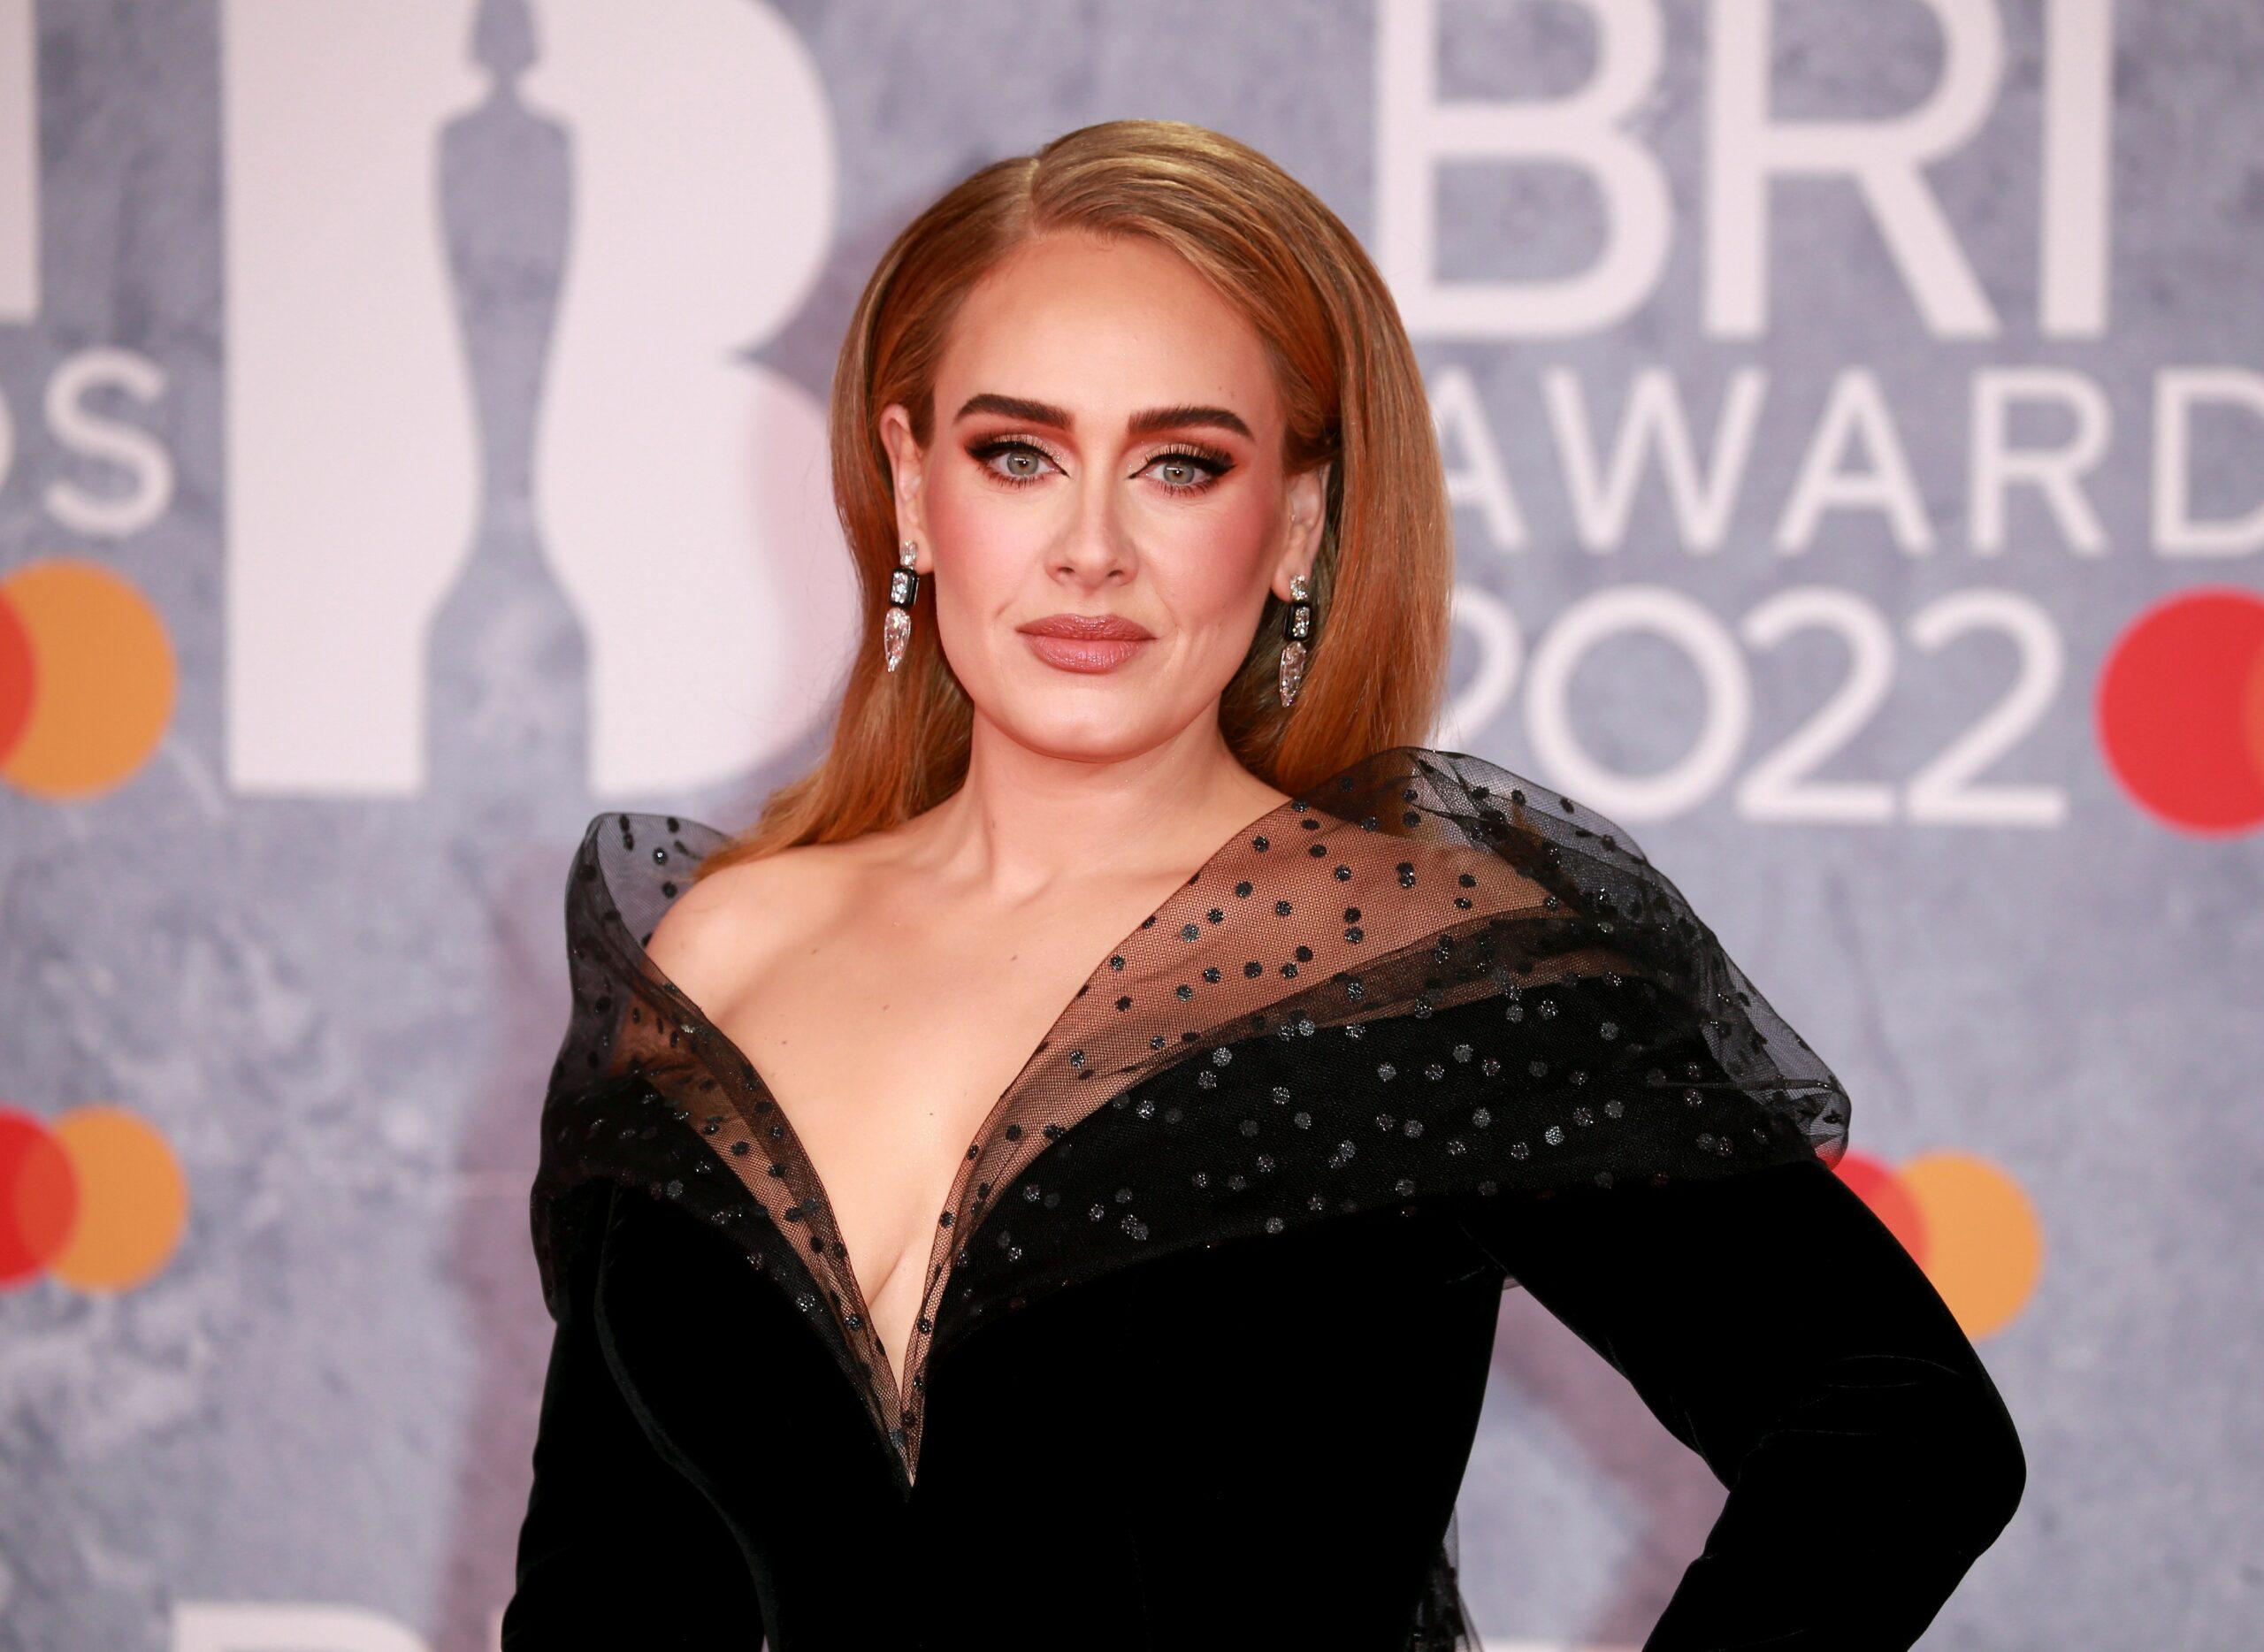 Adele at The BRIT Awards 2022 in London.